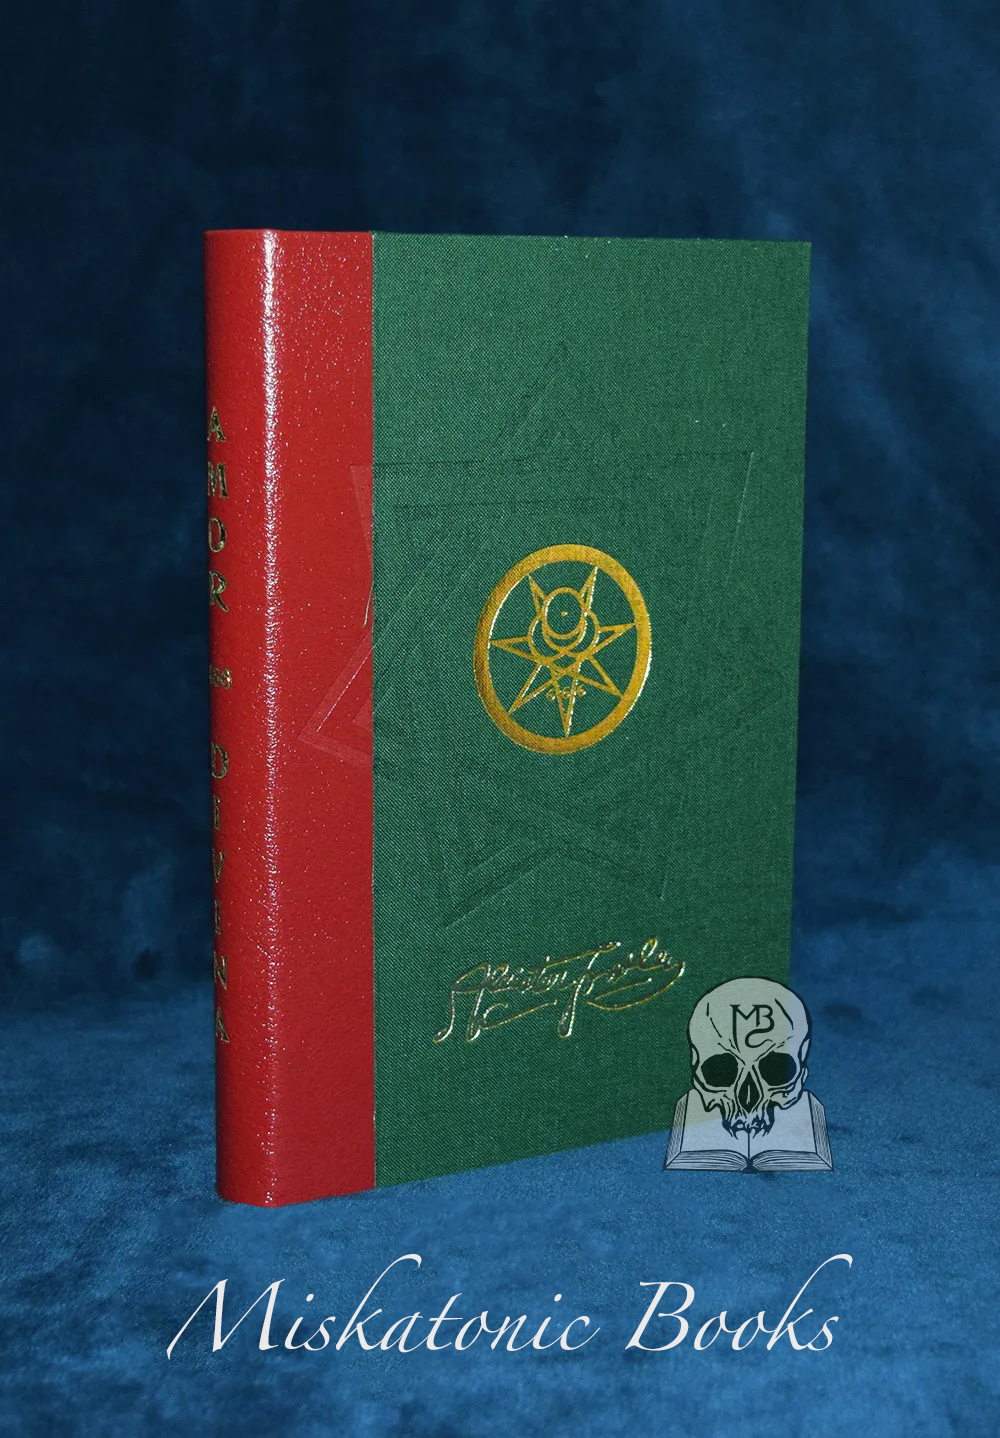 AMOR DIVINA by Aleister Crowley - Limited Edition Hardcover Quarter Bound in Scarlet Pigskin and Cloth